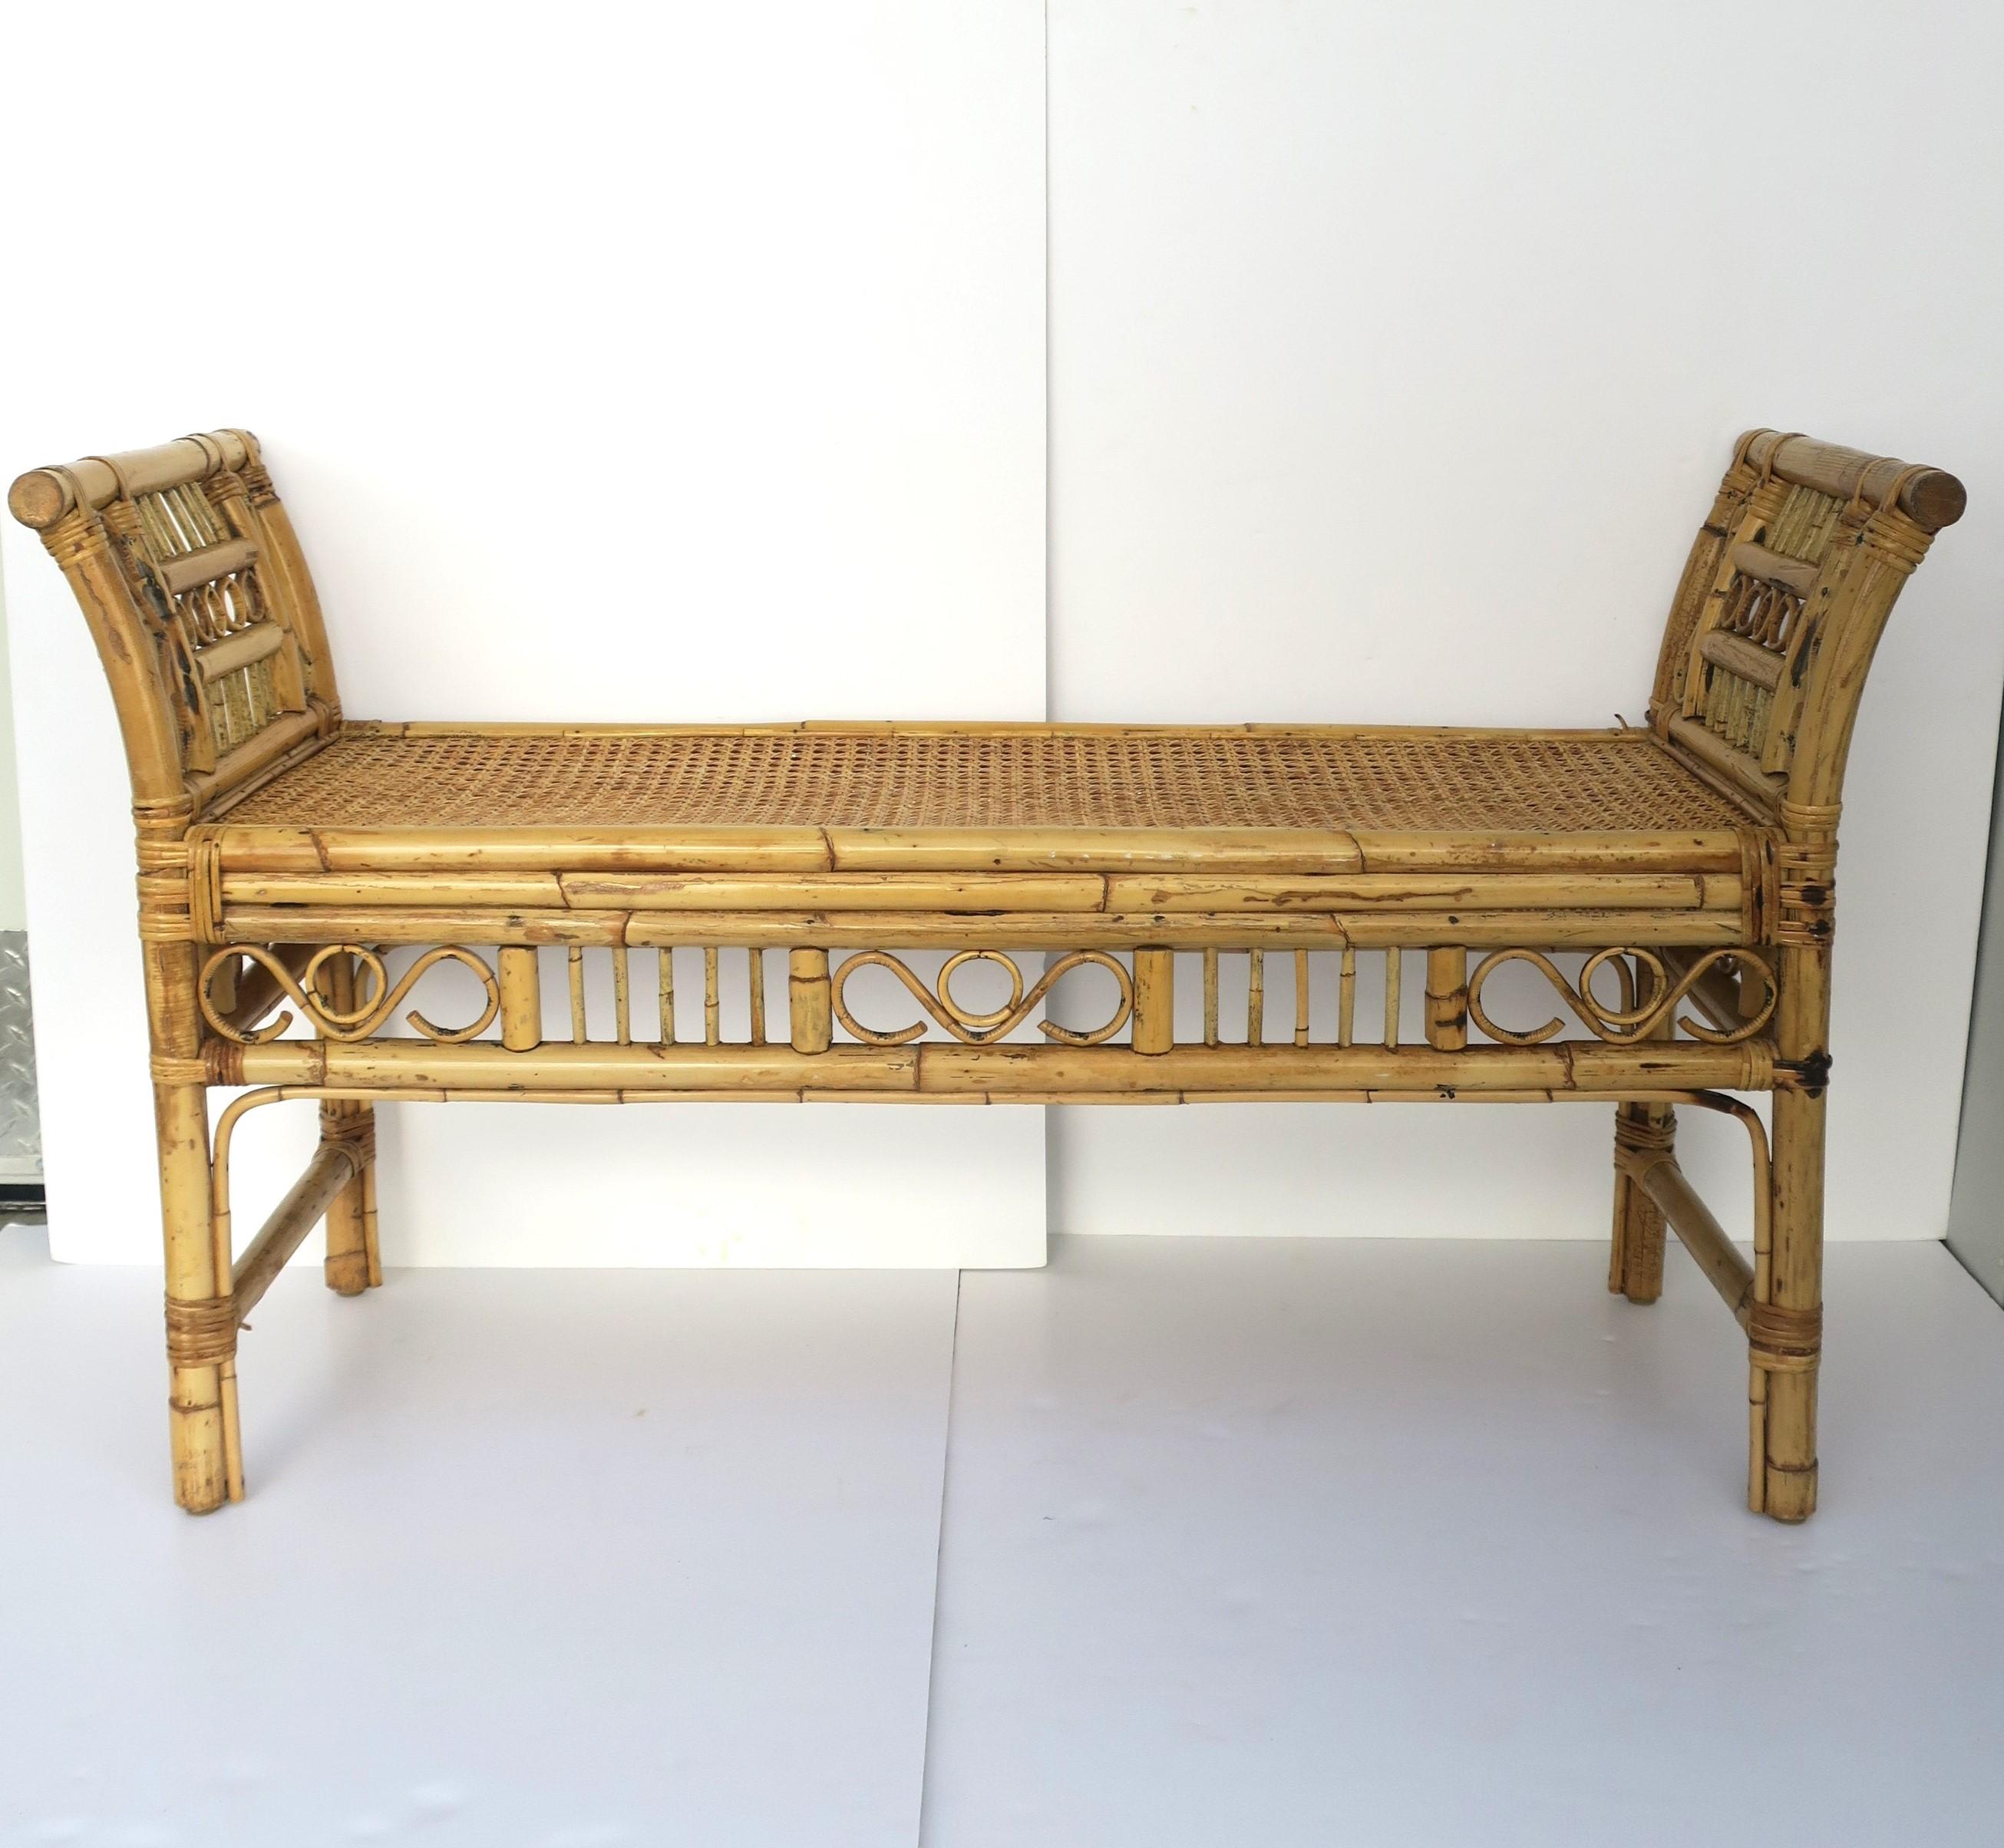 A blonde wicker, bamboo and cane bench in the Chinoiserie style, circa mid to late-20th century. Frame is bamboo, wicker wrapped, with a cane seat. Piece may also work outside providing area is covered, e.g. porch area. 

Dimensions: 
17